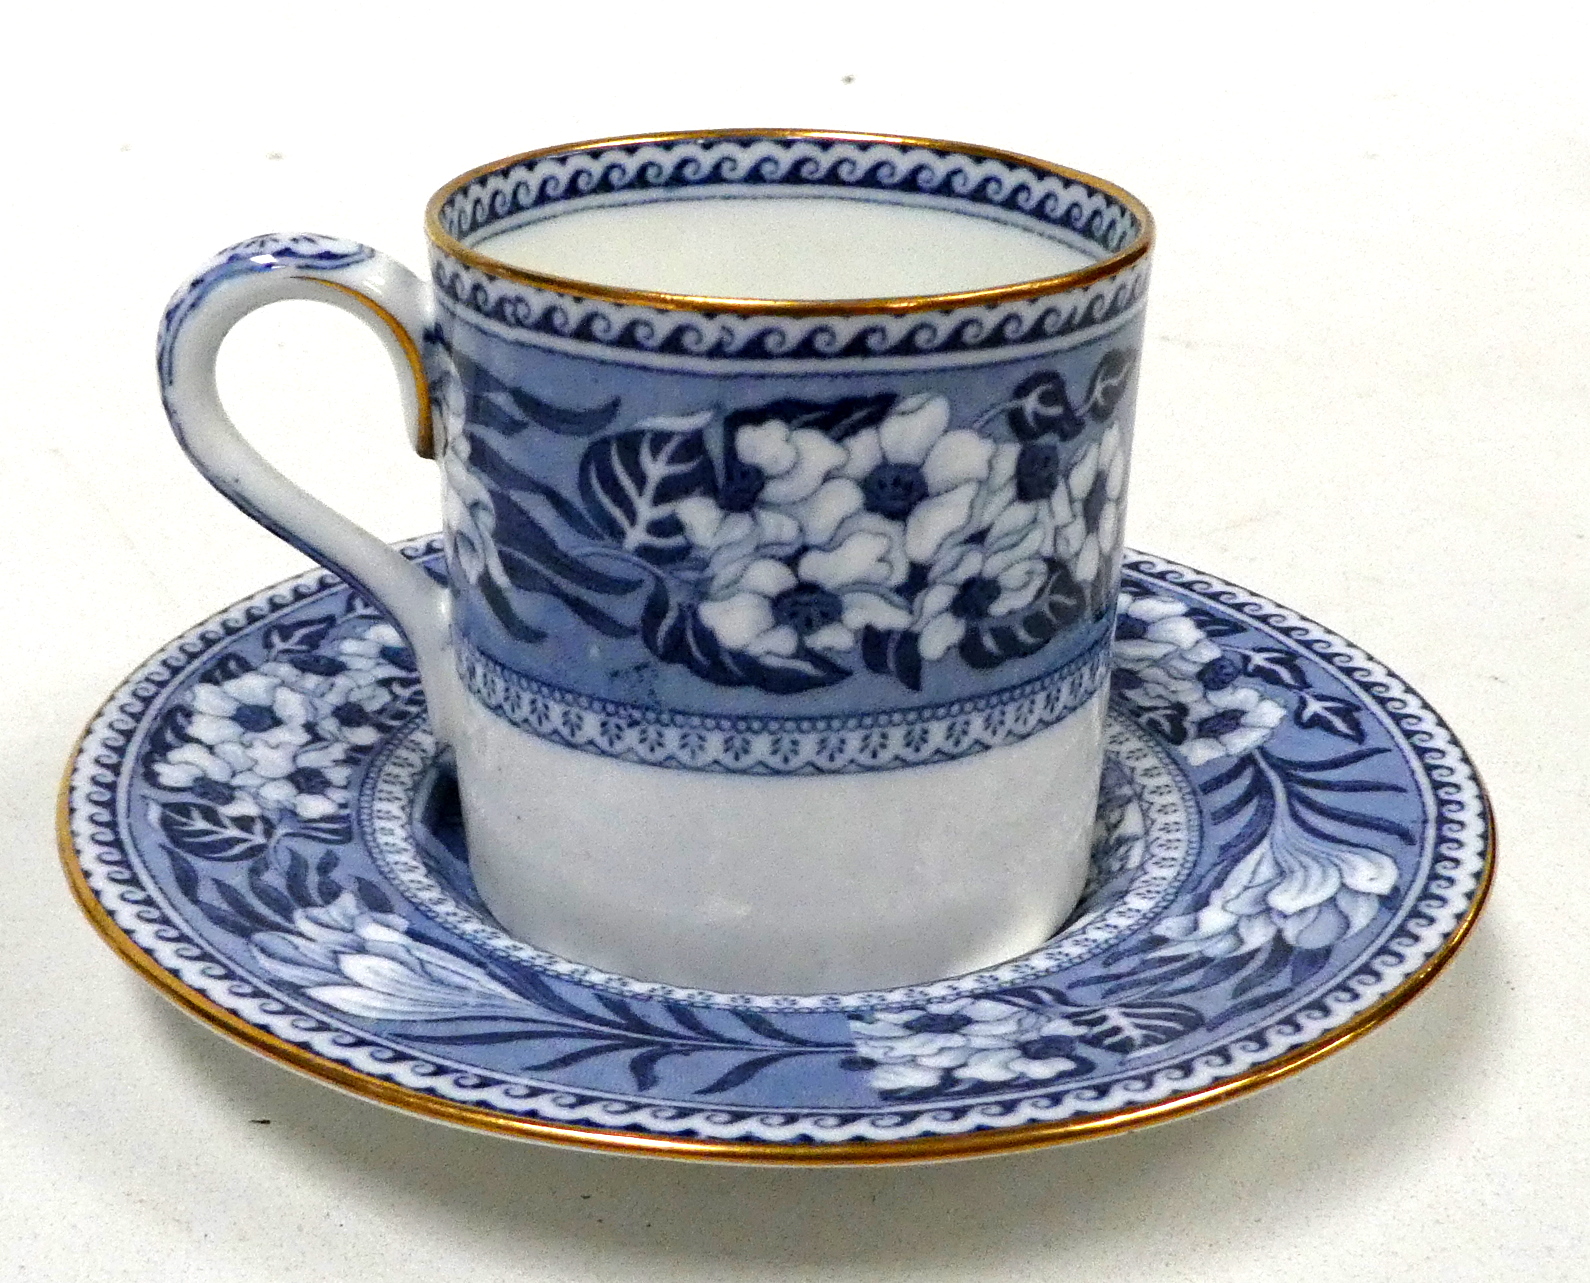 A Wedgwood coffee service for six - blue and white decorated with bucolic scenes, comprising six - Image 5 of 6